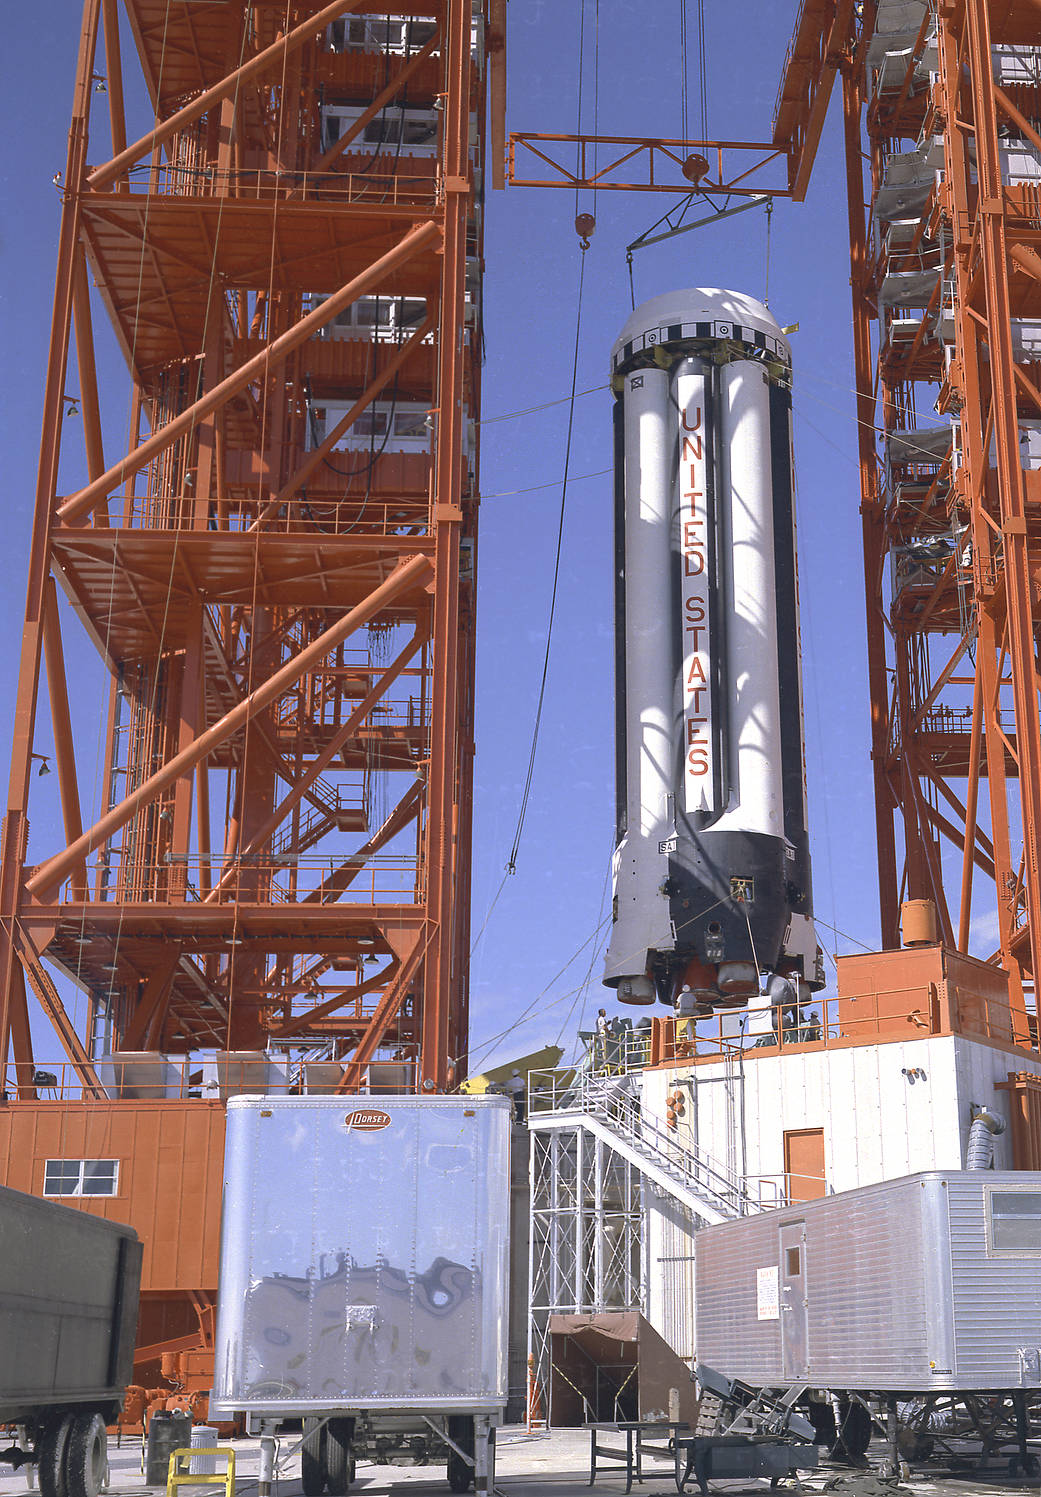 This week in 1961, the first Saturn I rocket, SA-1, arrived at NASA's Kennedy Space Center. 